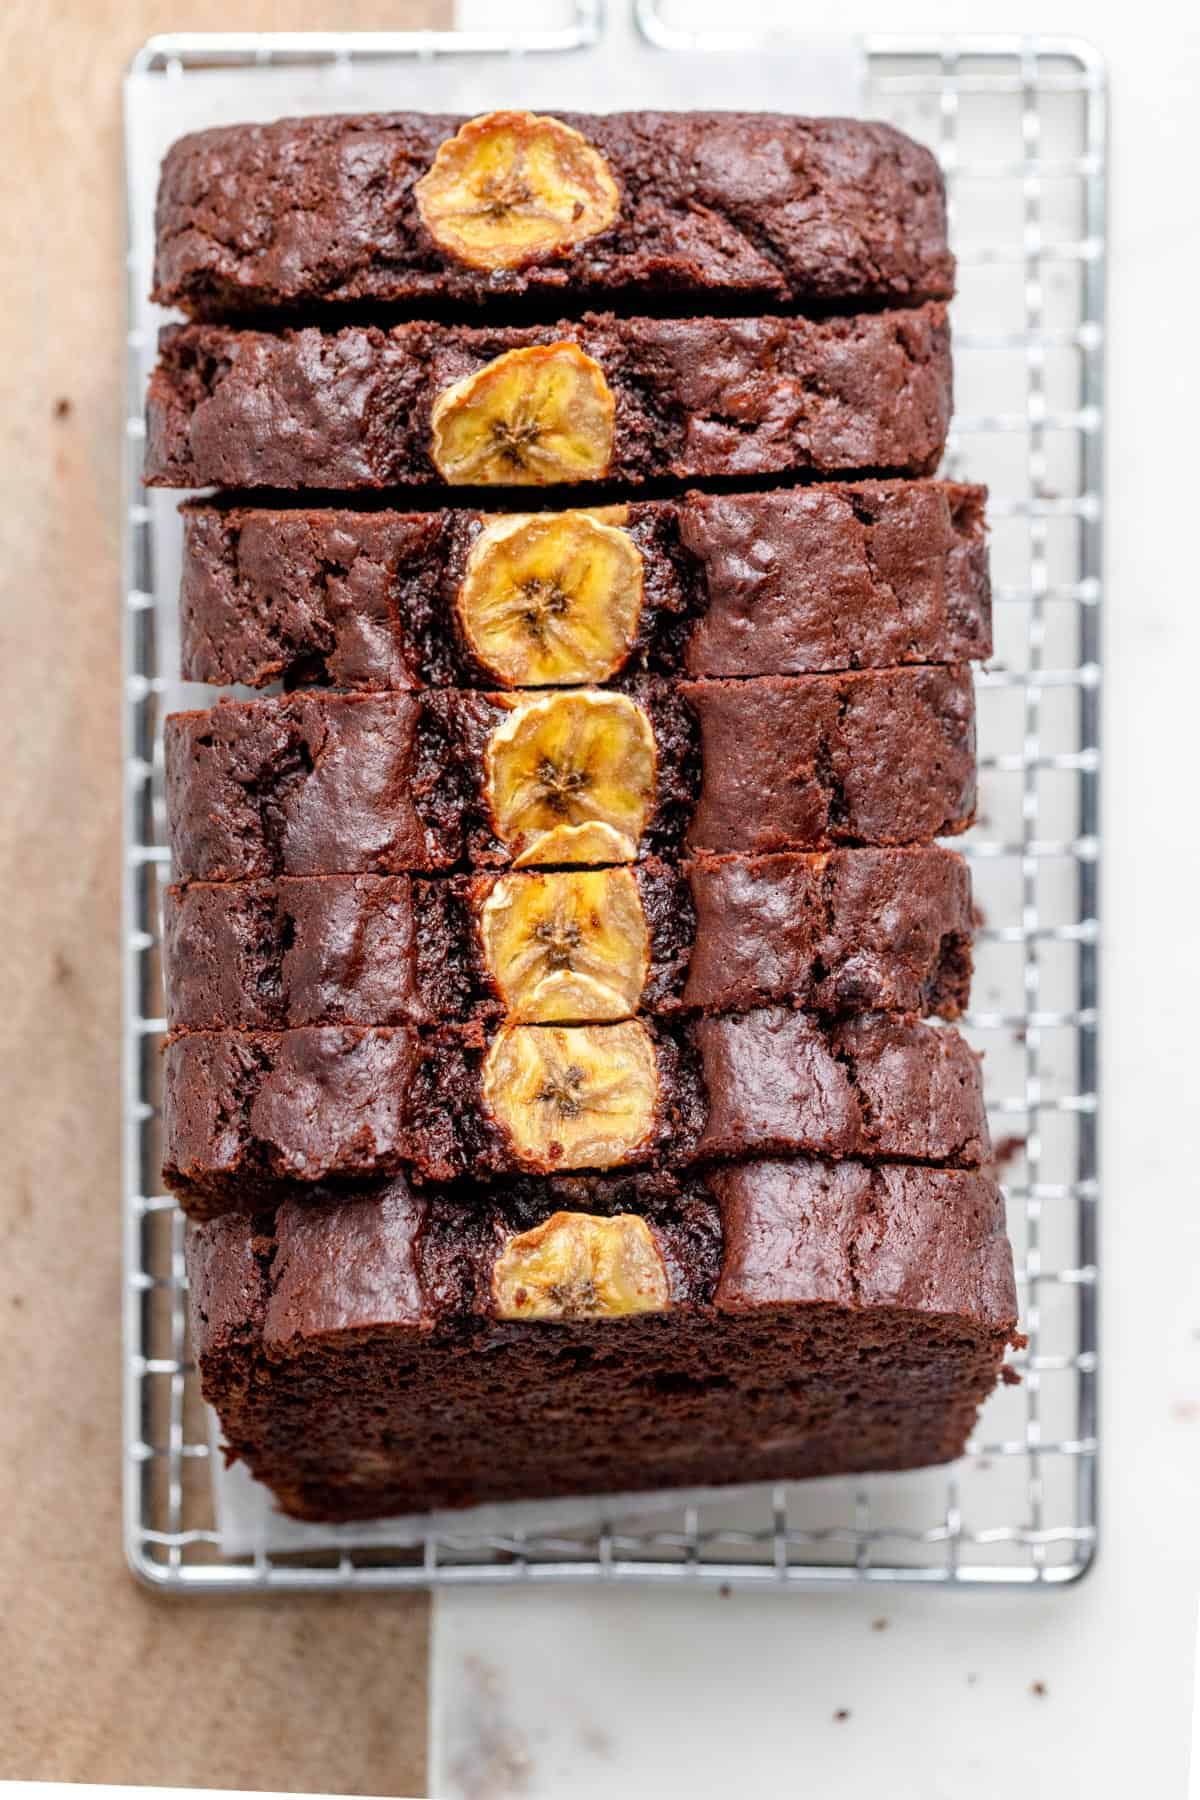 Chocolate Peanut Butter Banana Bread Feelgoodfoodie